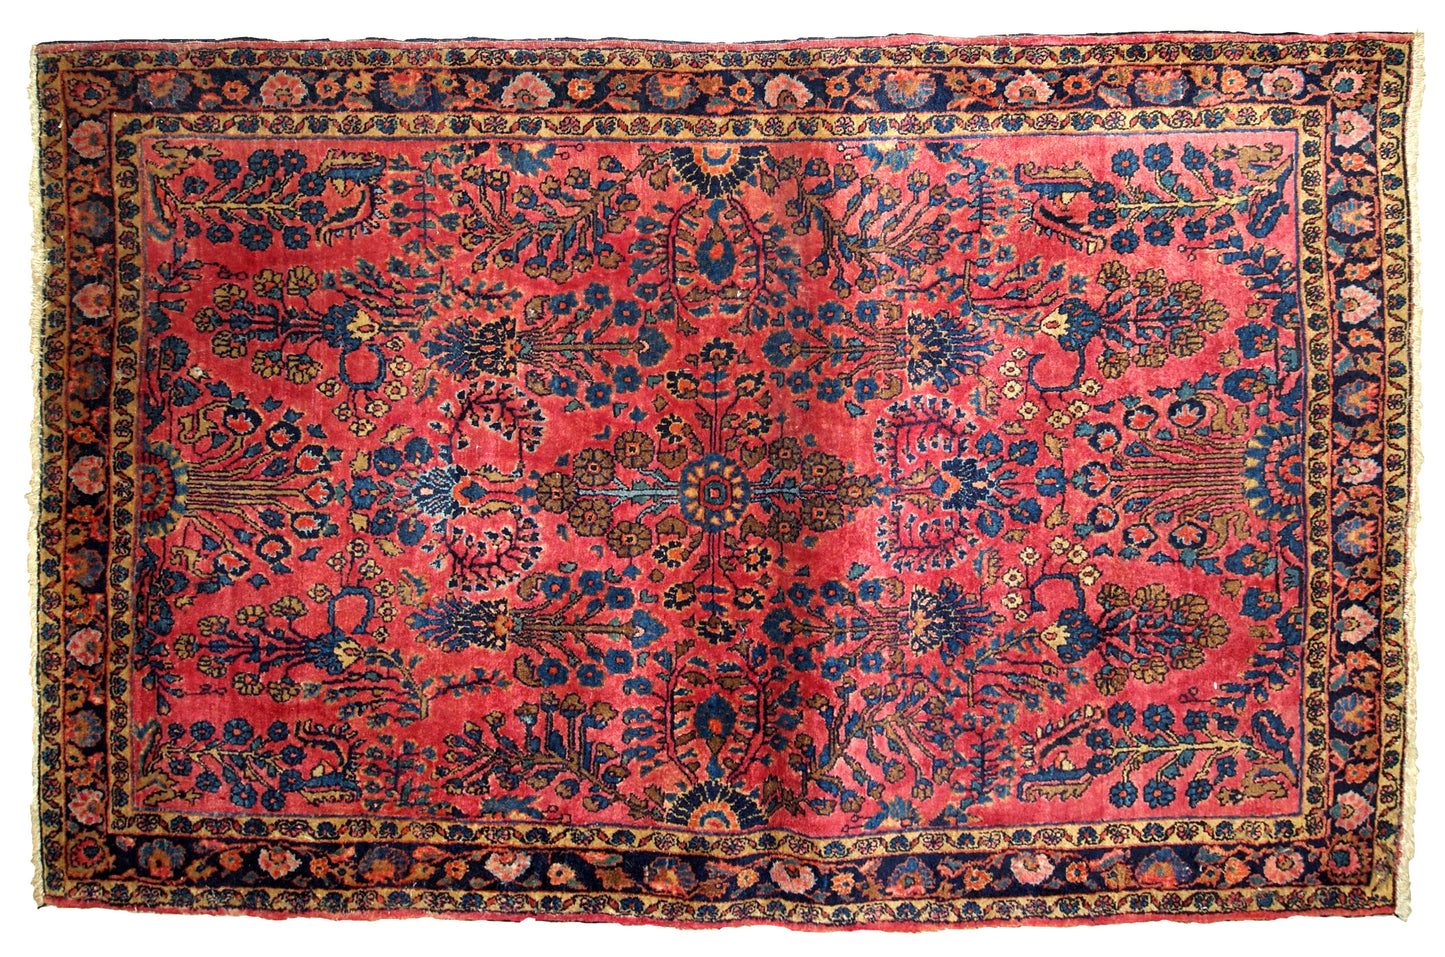 Hand-weaved antique Sarouk rug from the beginning of 20th century. The rug is in original good condition.